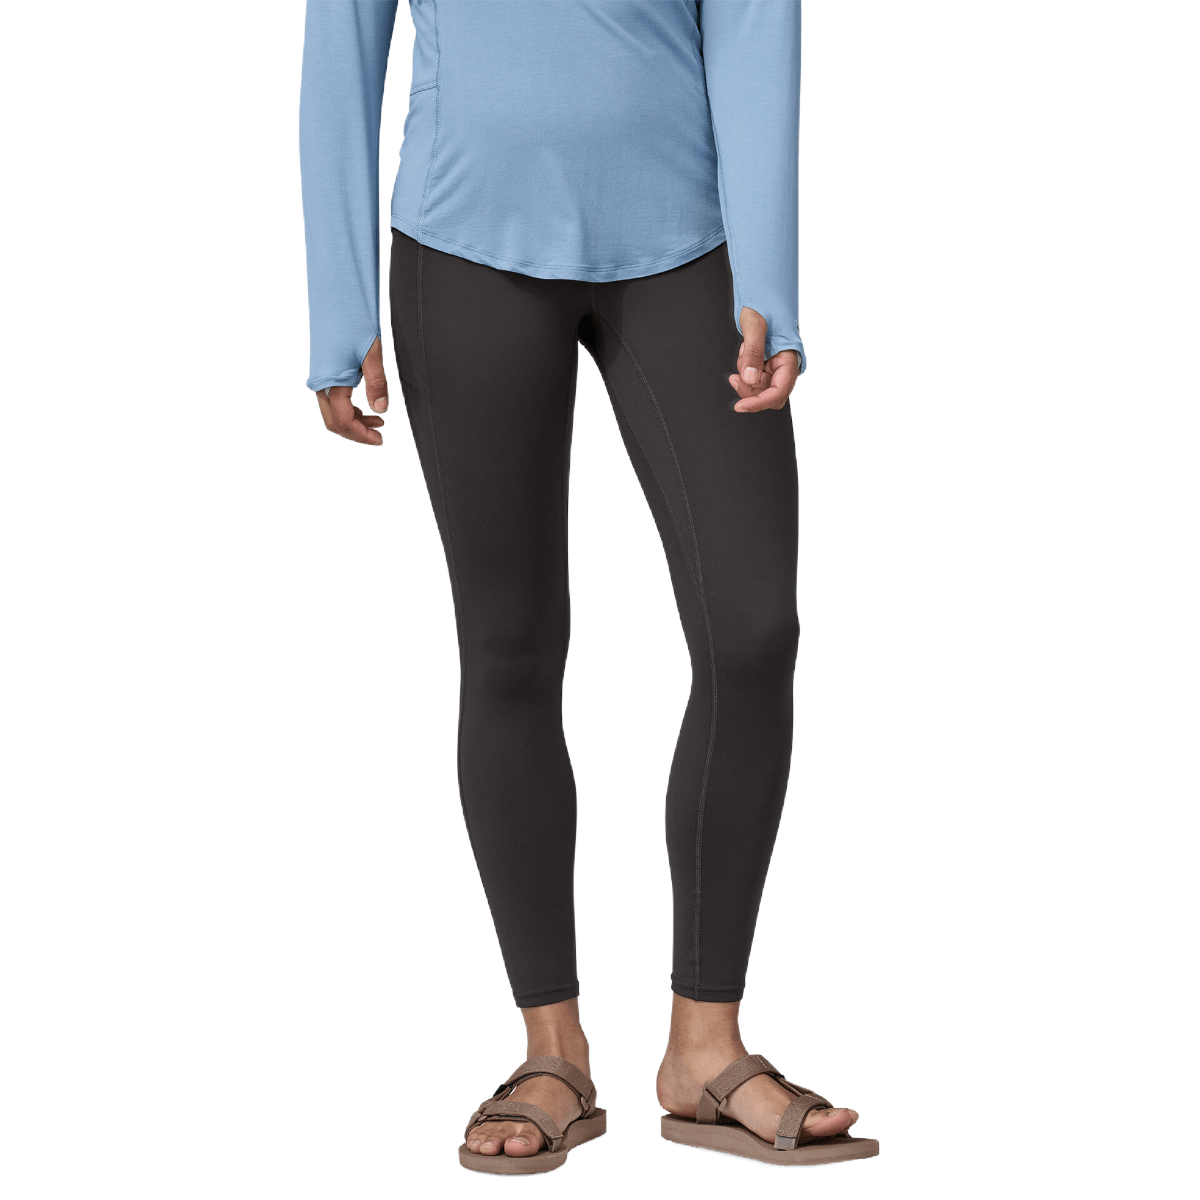 Patagonia Maipo 7/8 Stash Tight - Women's - Al's Sporting Goods: Your  One-Stop Shop for Outdoor Sports Gear & Apparel